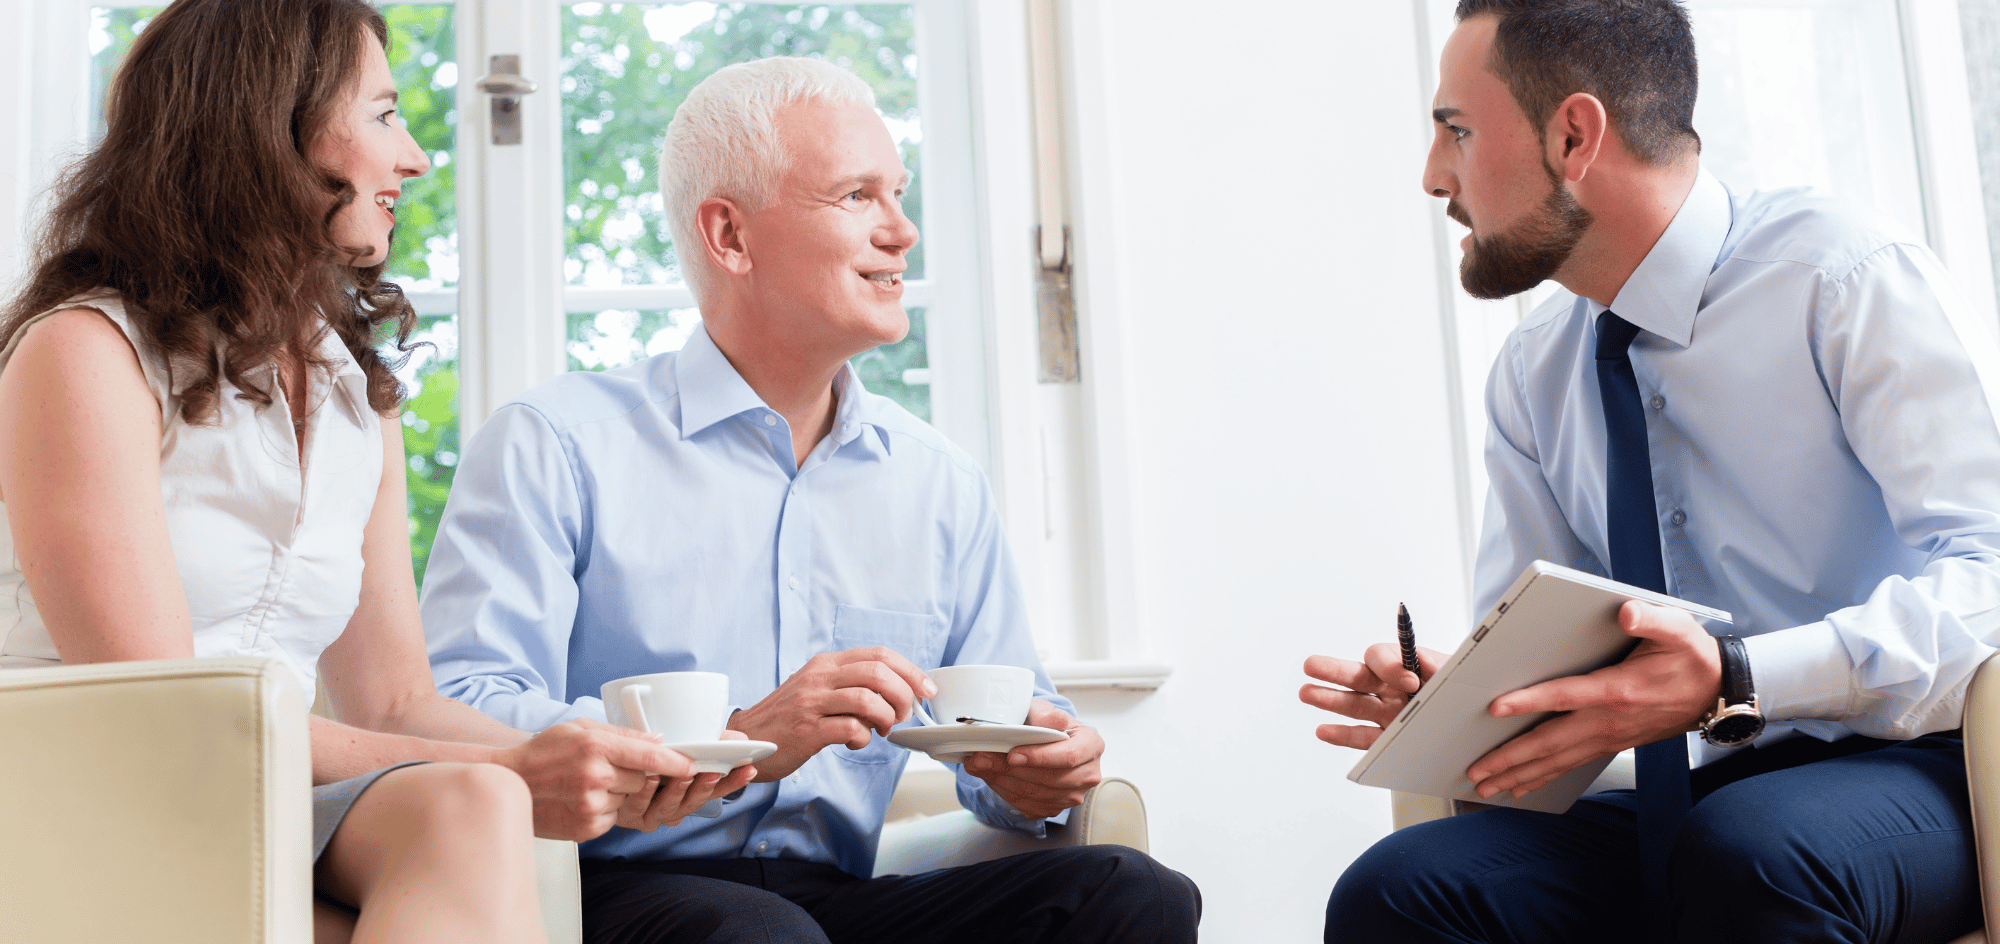 A financial advisor discussed with an older gentleman and a middle age lady.